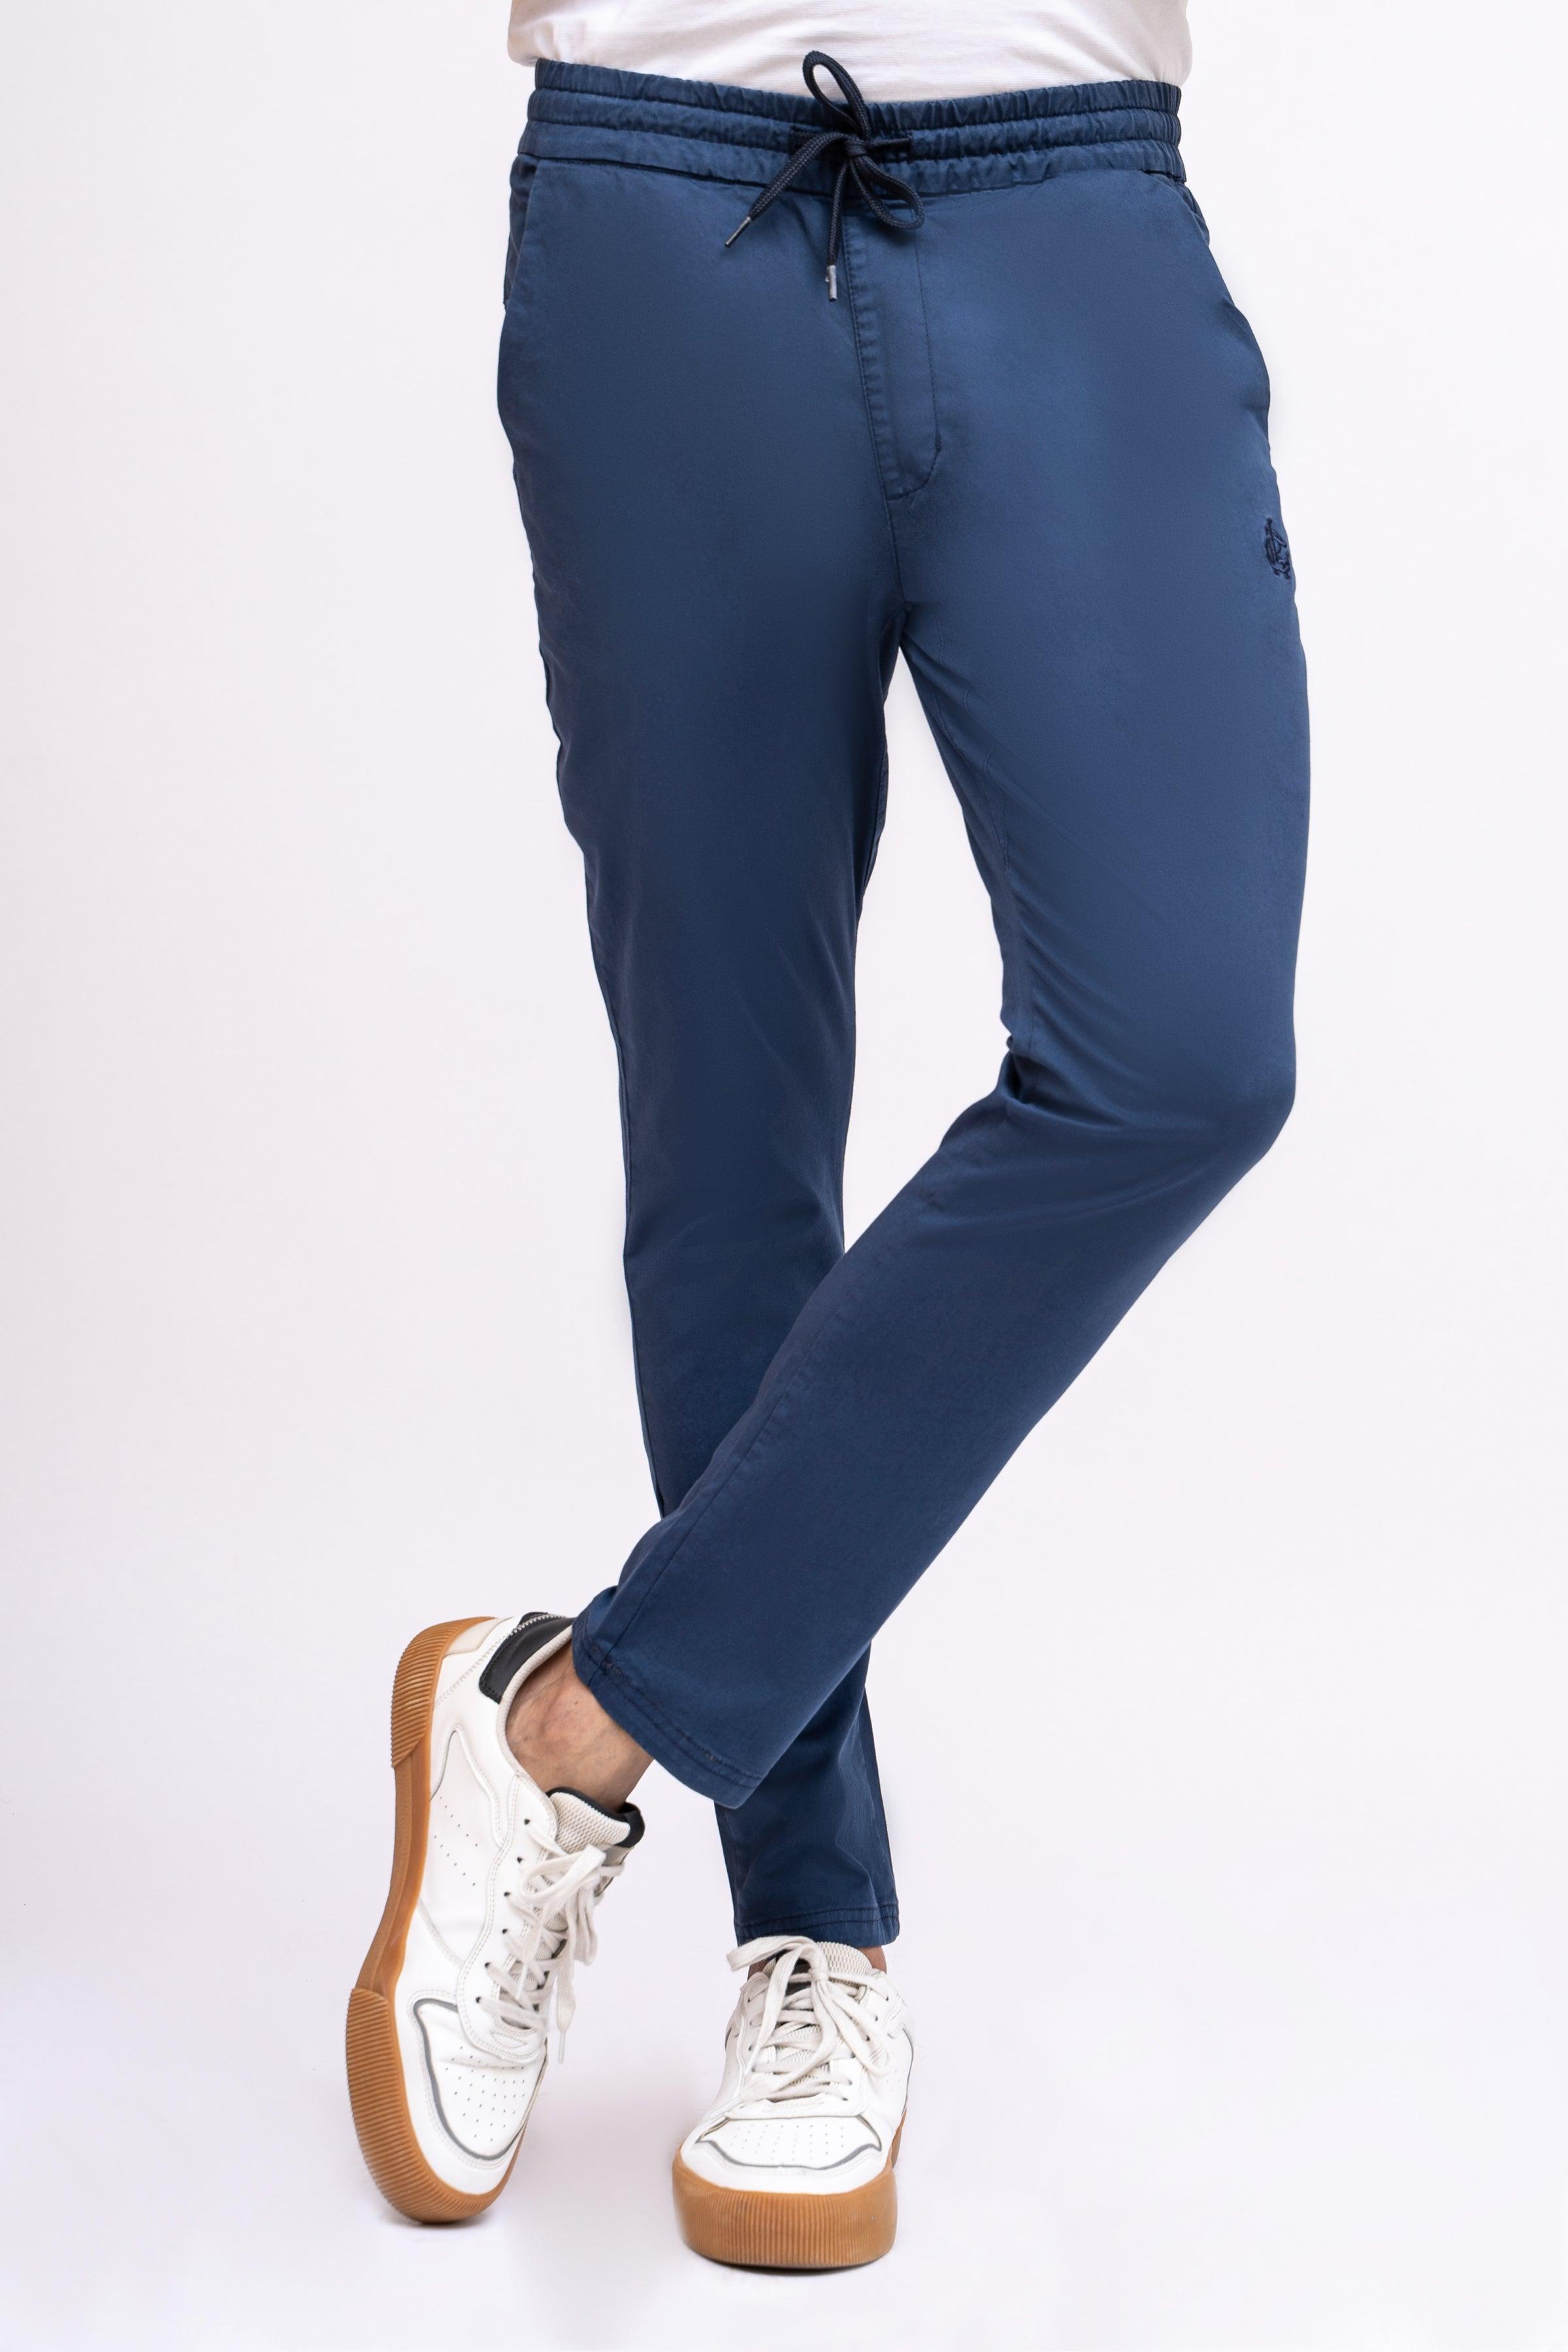 CASUAL JOGAR TROUSER NAVY at Charcoal Clothing